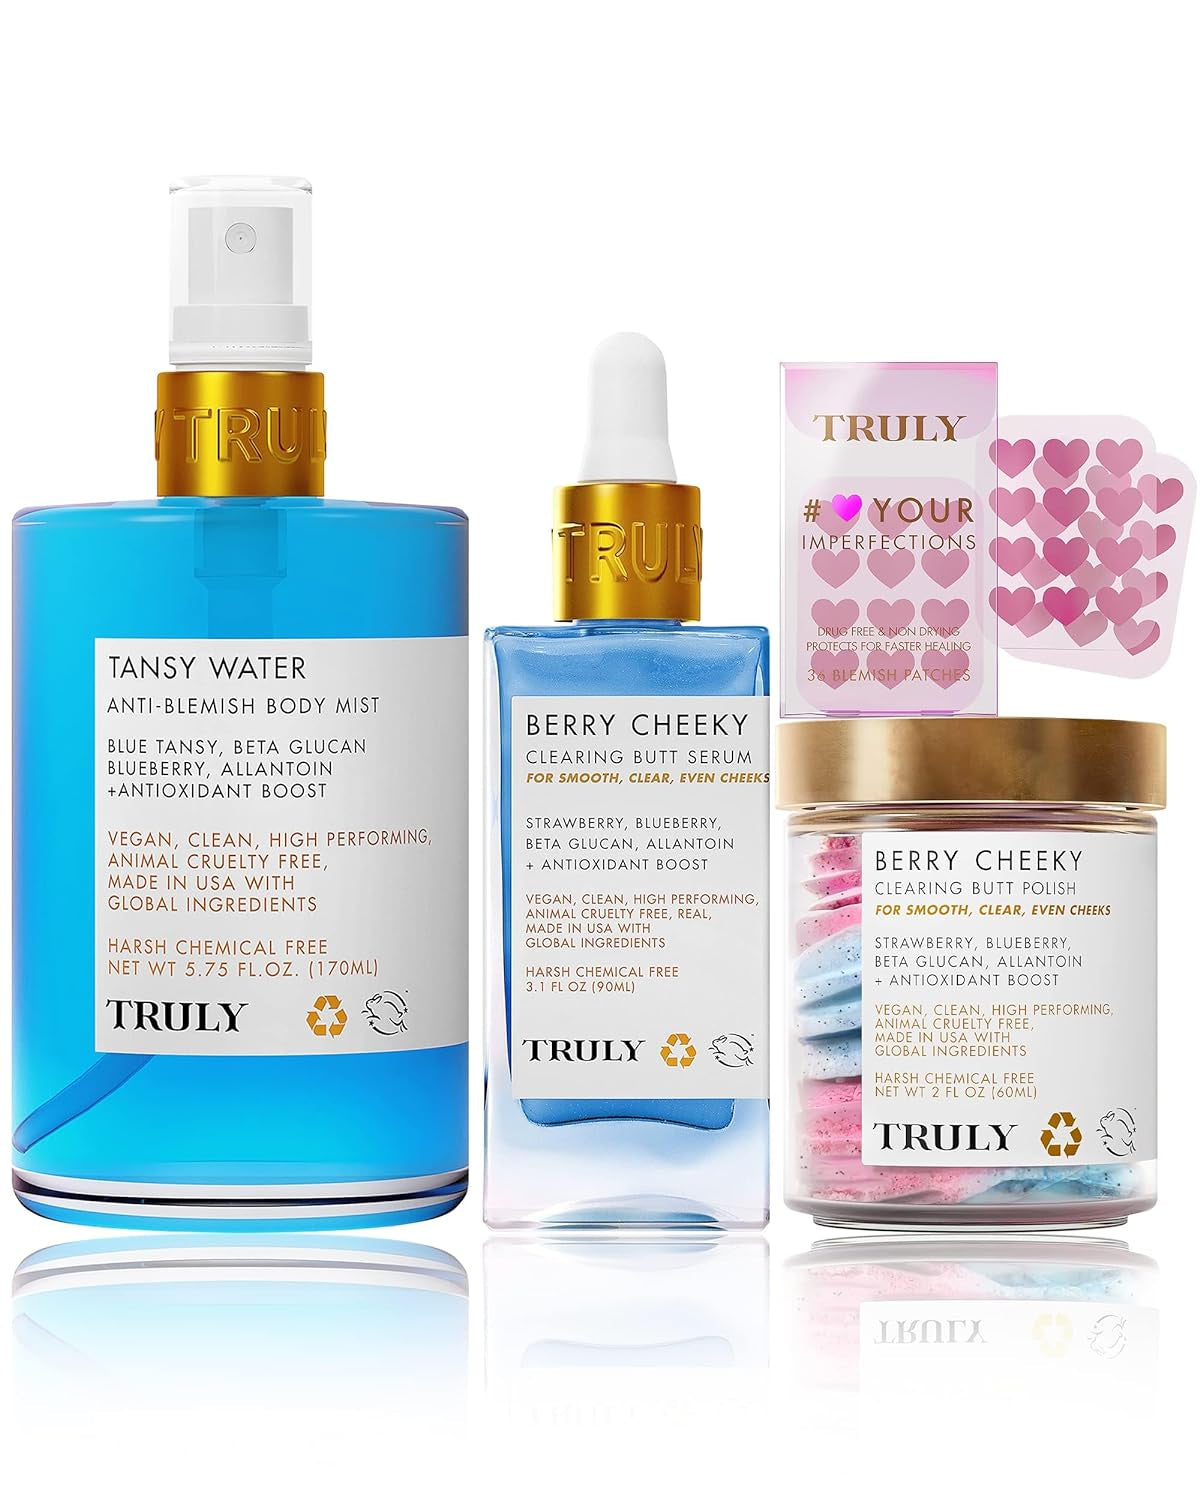 Truly Beauty Acne Treatment Bundle - Full Body Exfoliator with Pimple Patches and Hydrocolloid Back Patches